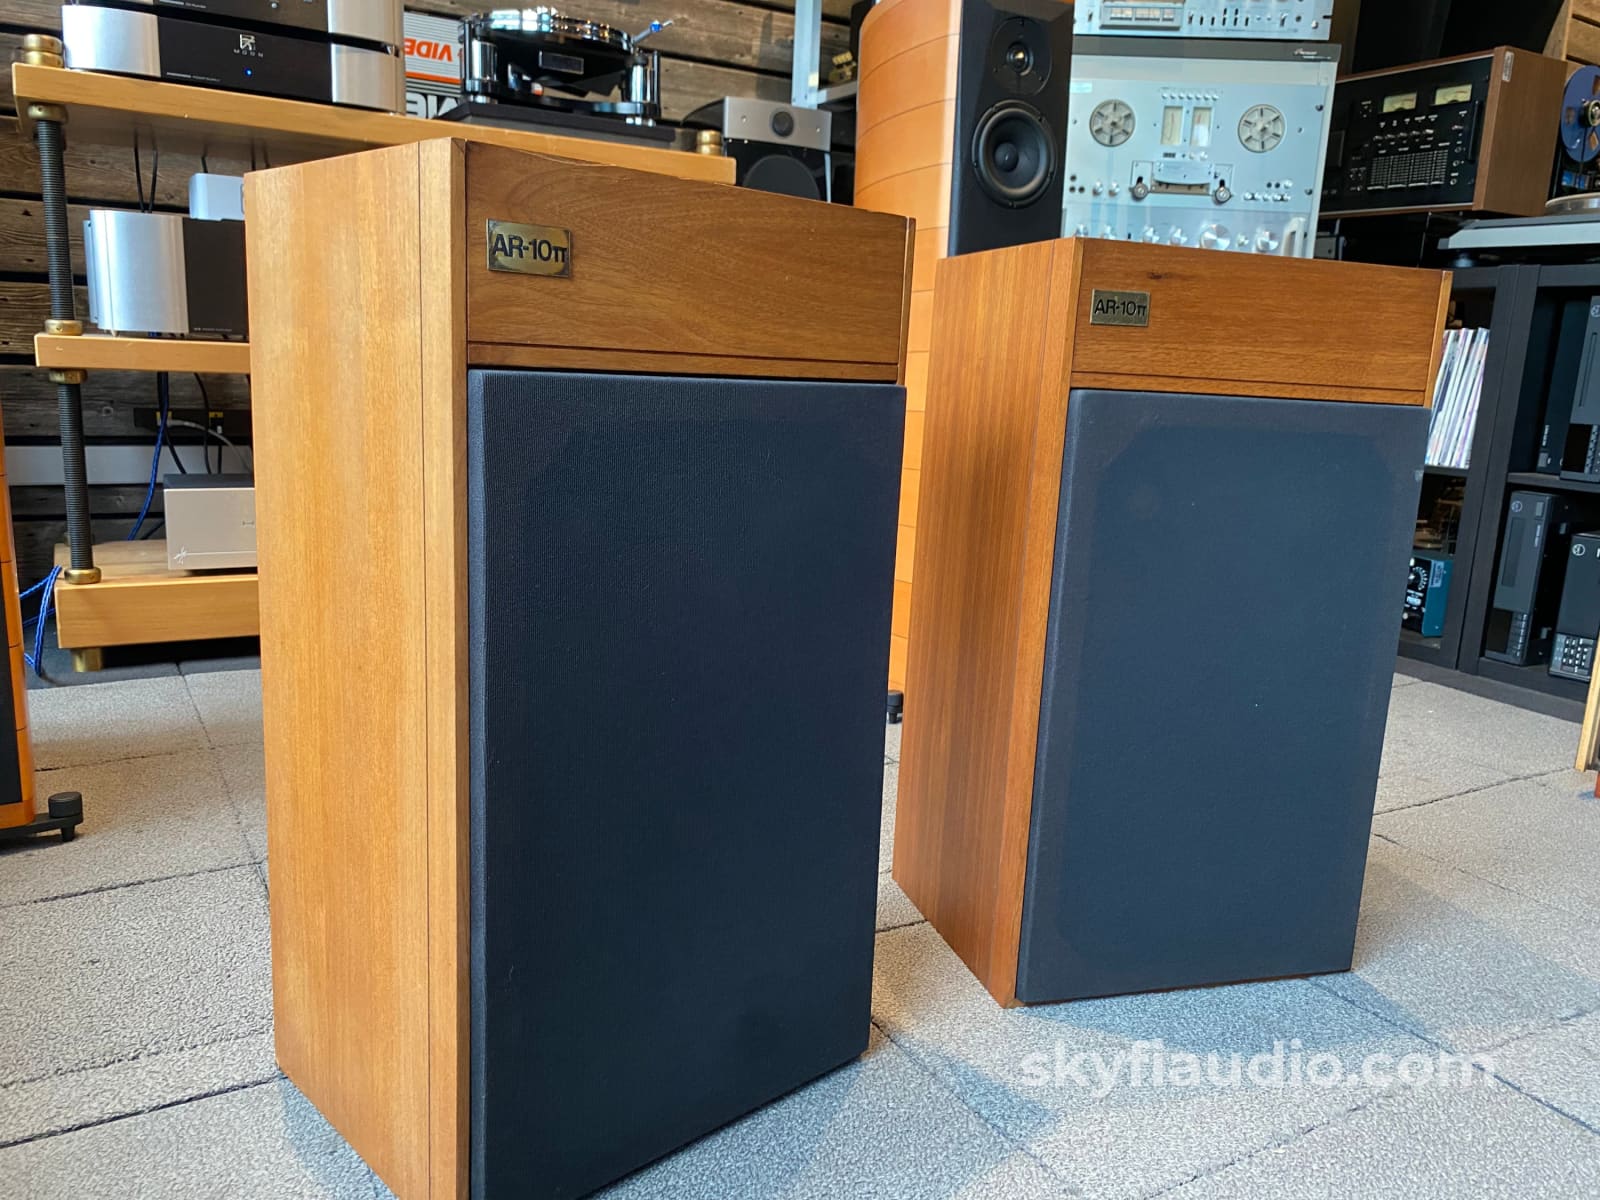 Acoustic Research Ar-10 Vintage Speakers Restored And Sounding Amazing